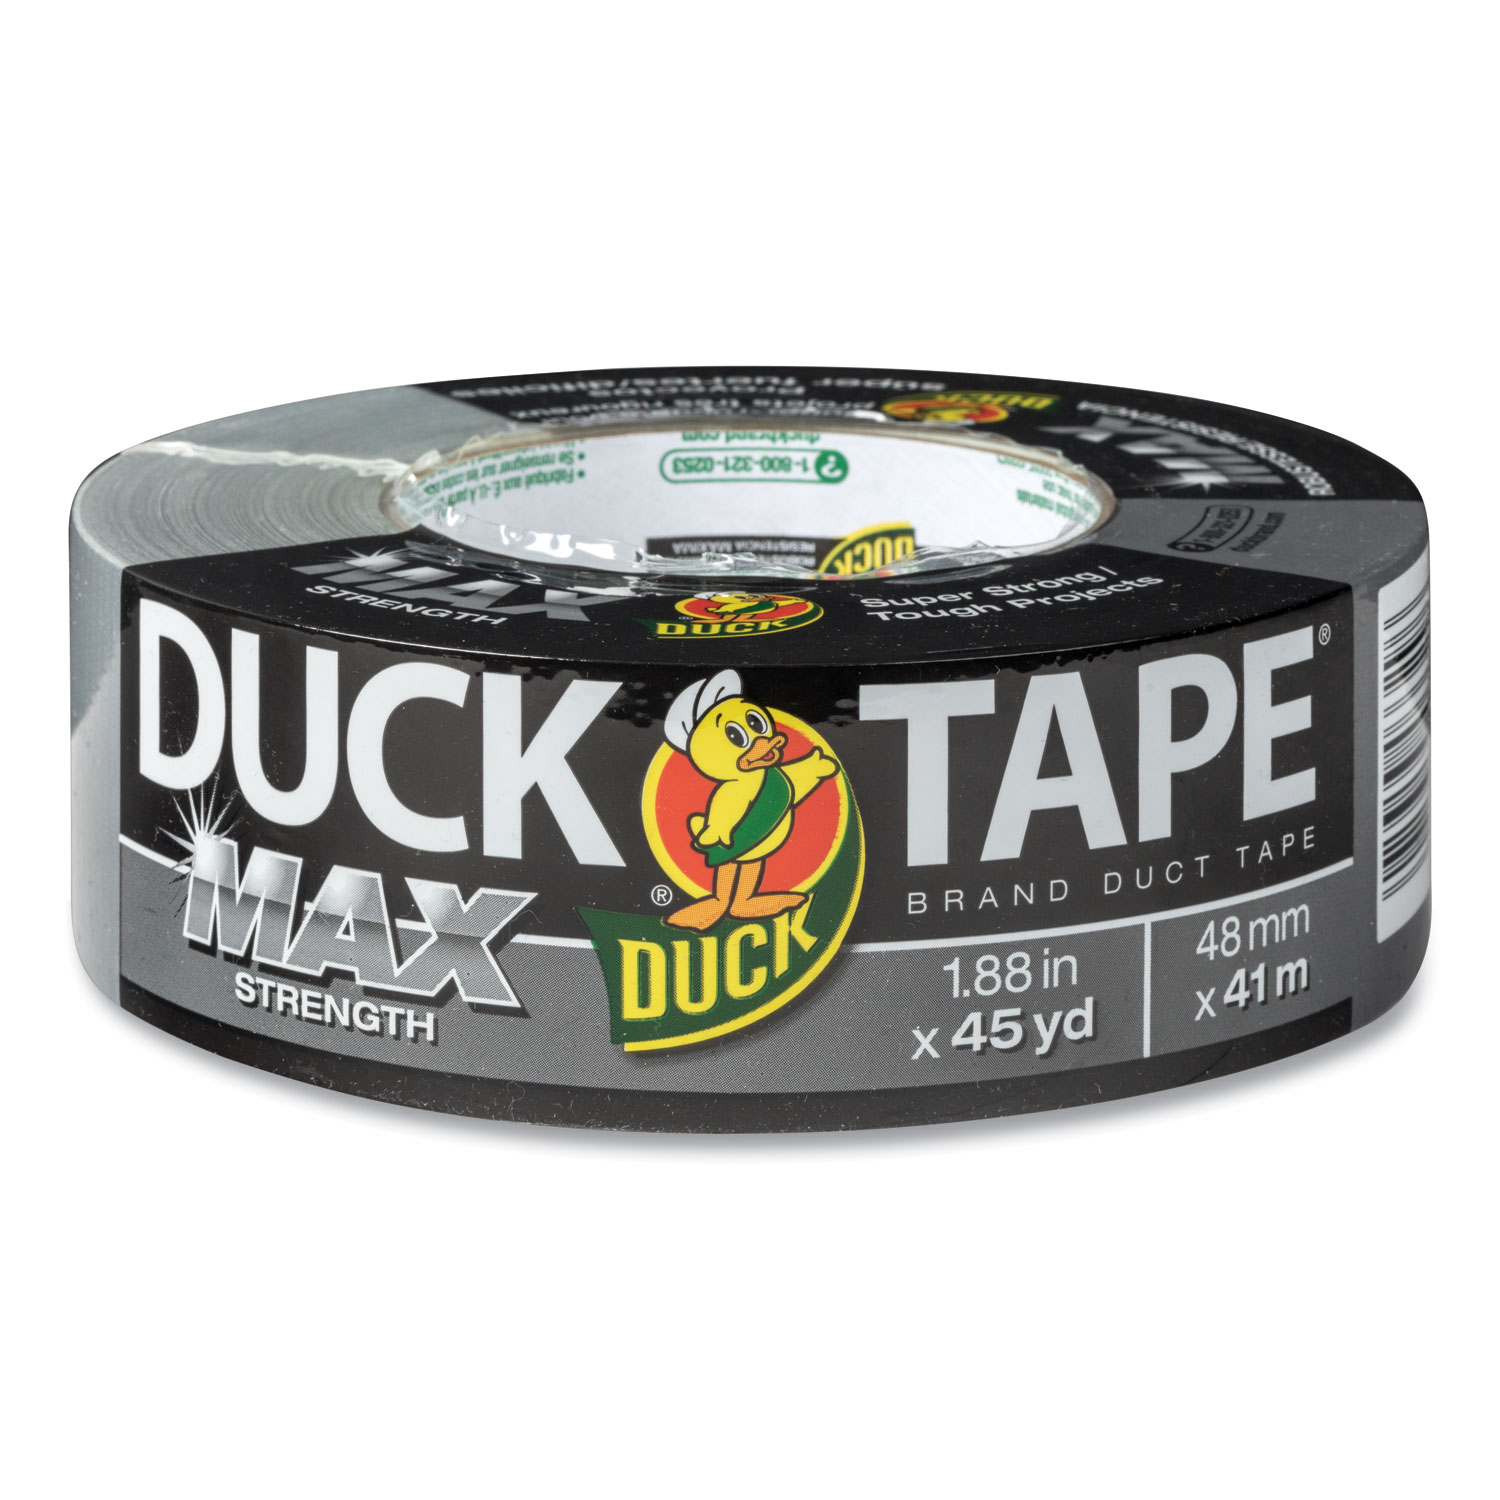  Duck 240201 MAX Duct Tape, 3 Core, 1.88 x 45 yds, Silver (DUC240201) 